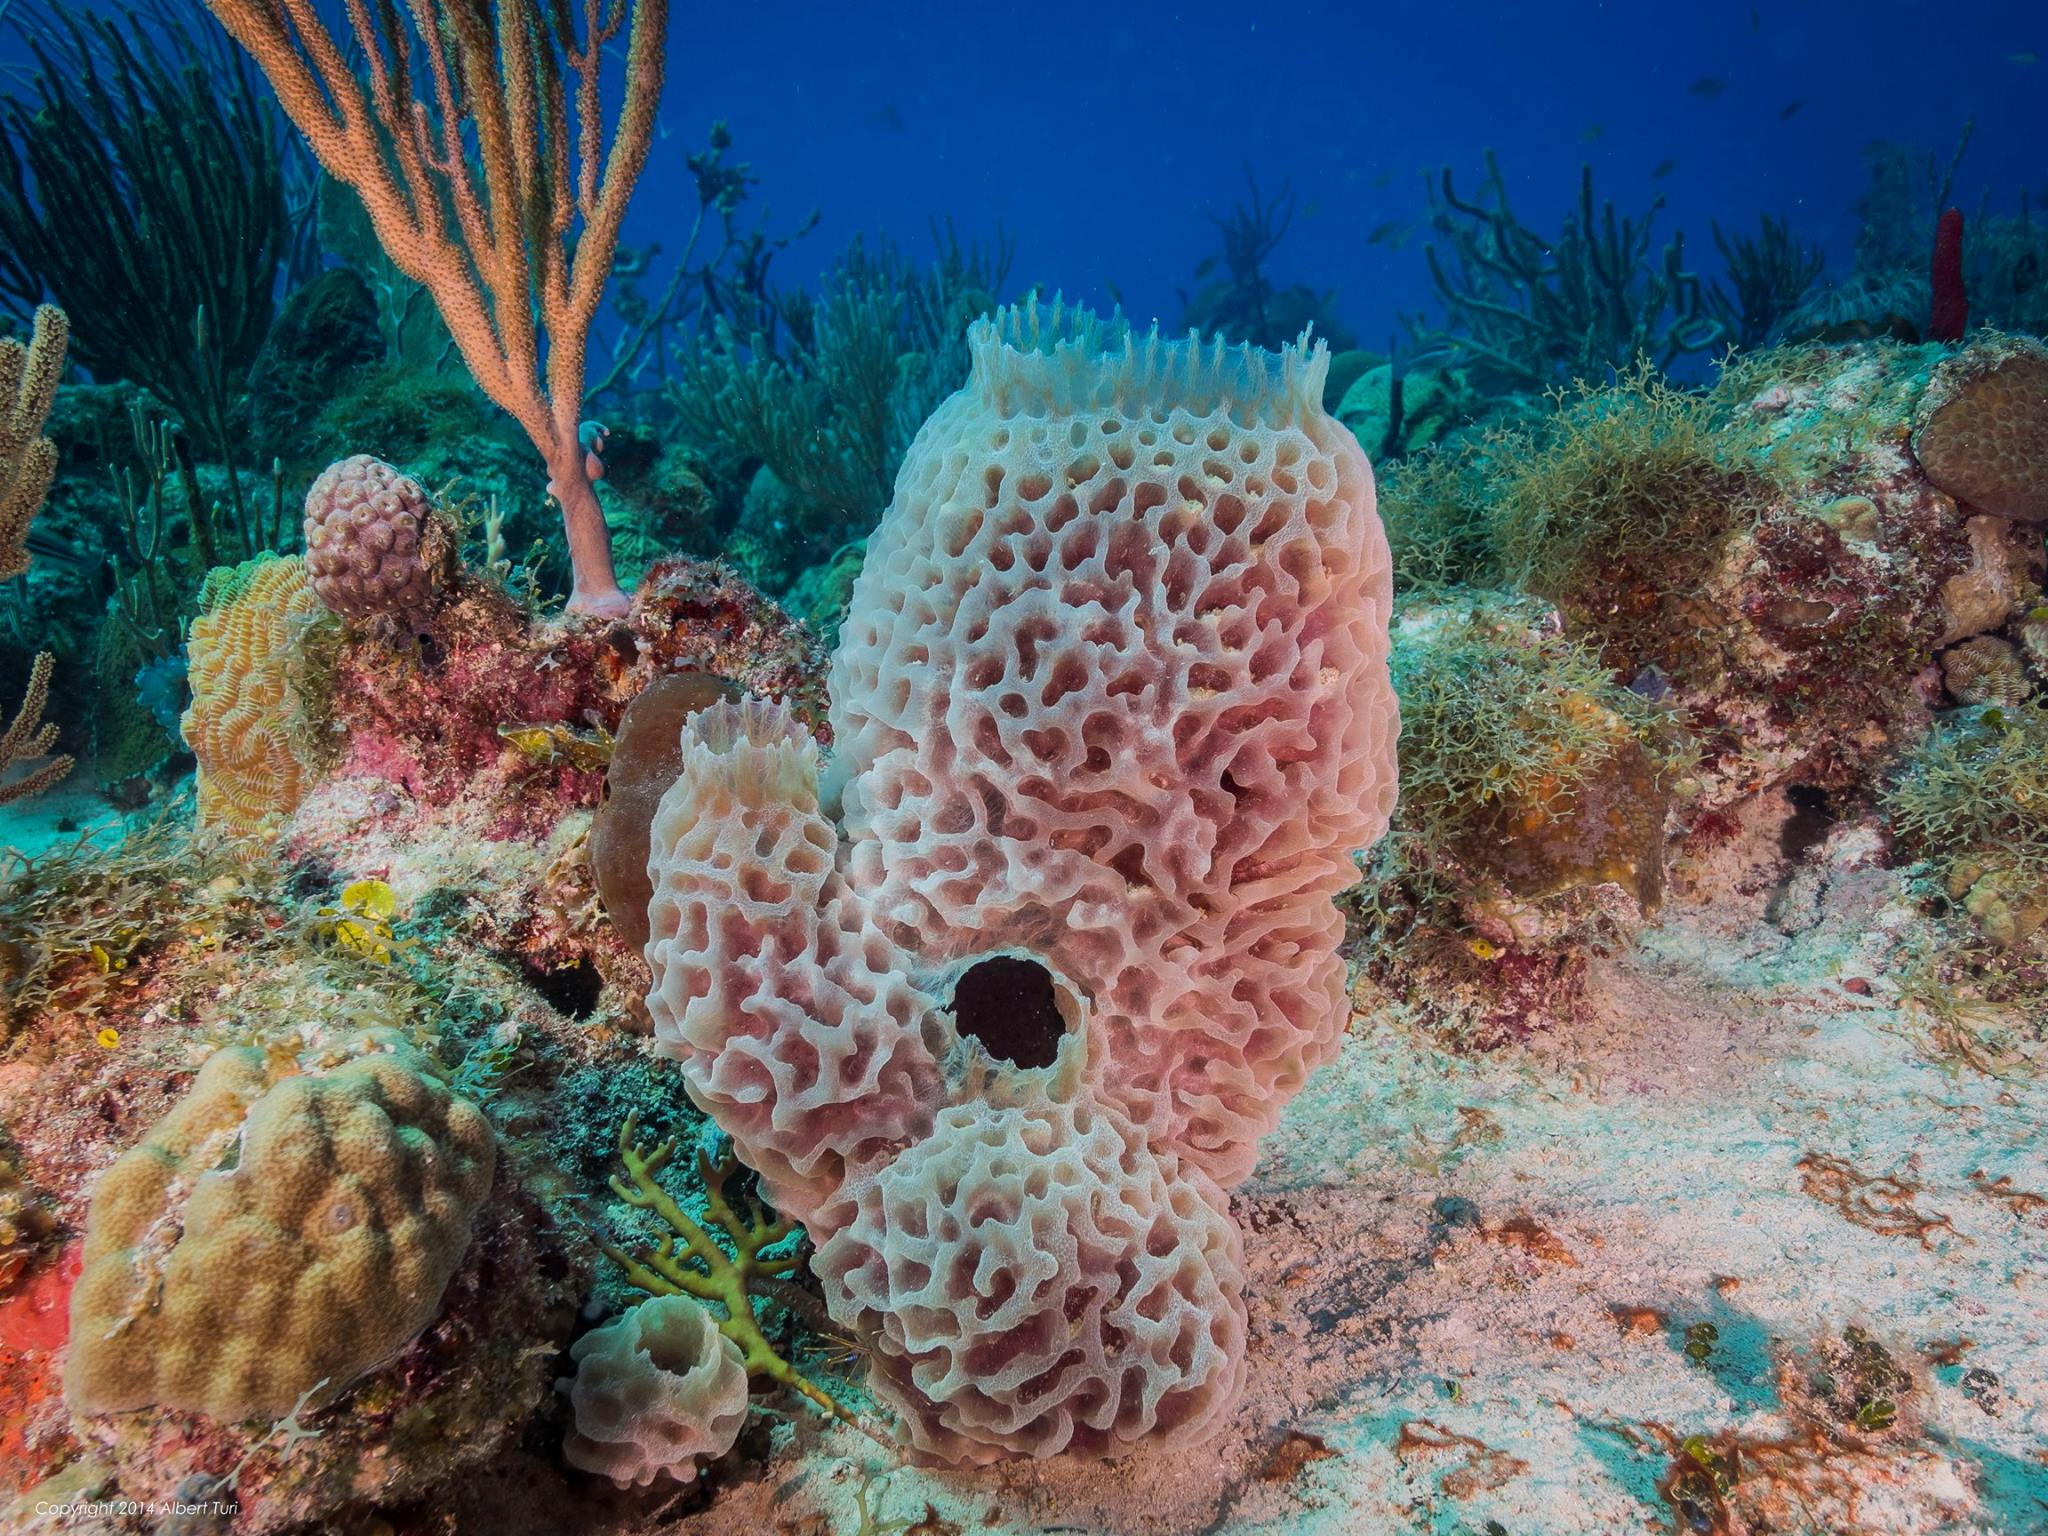 coral garden with sponges